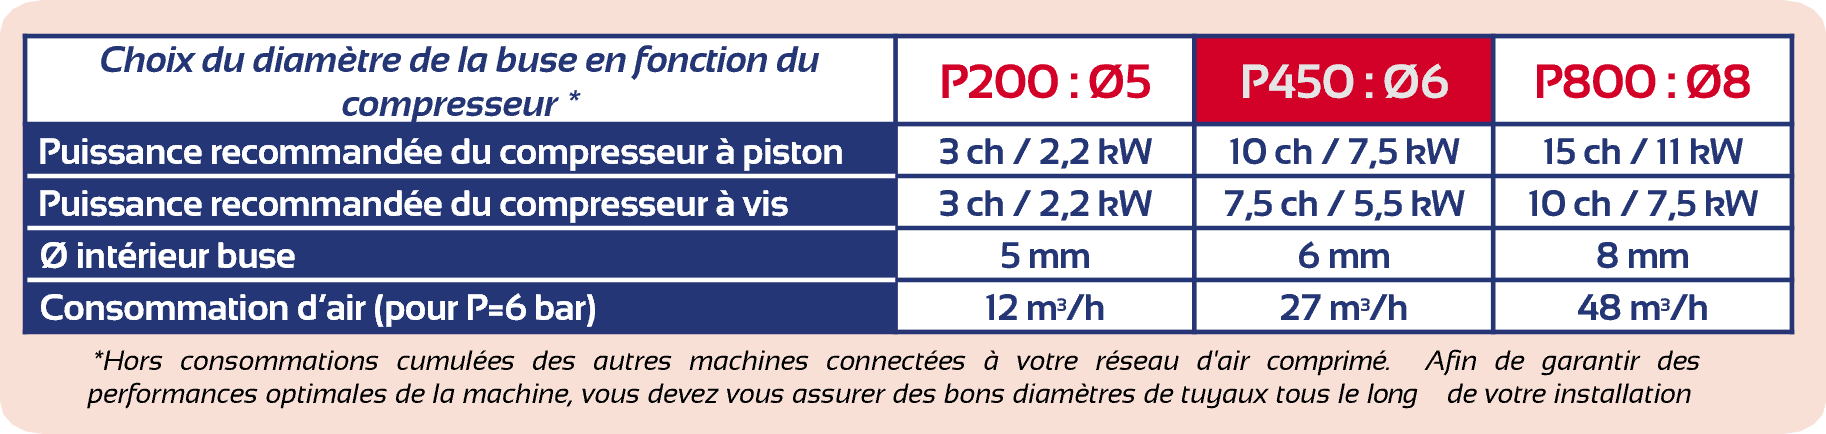 Choix Buses P200.png